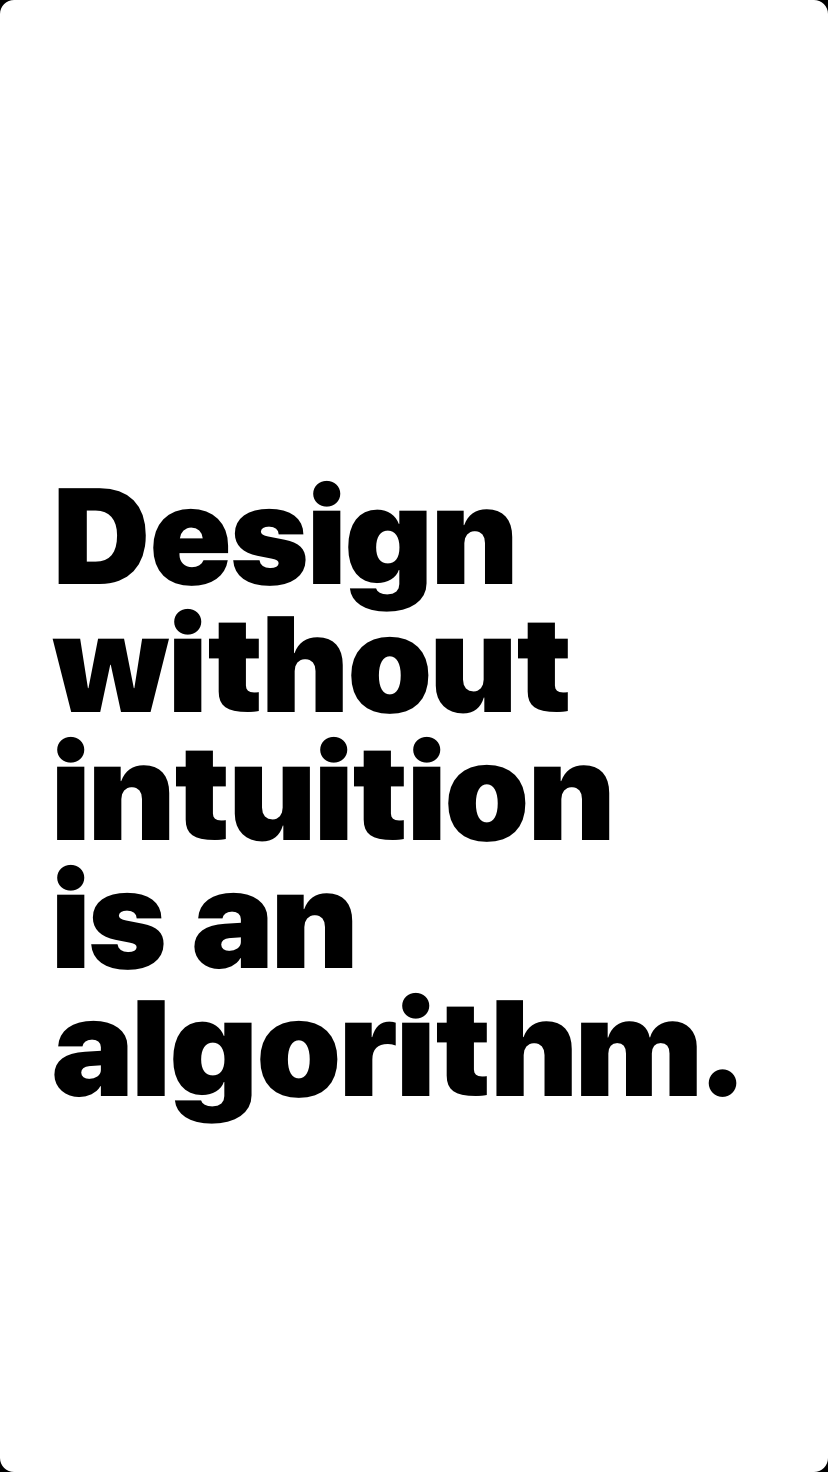 Design without intuition is an algorithm.